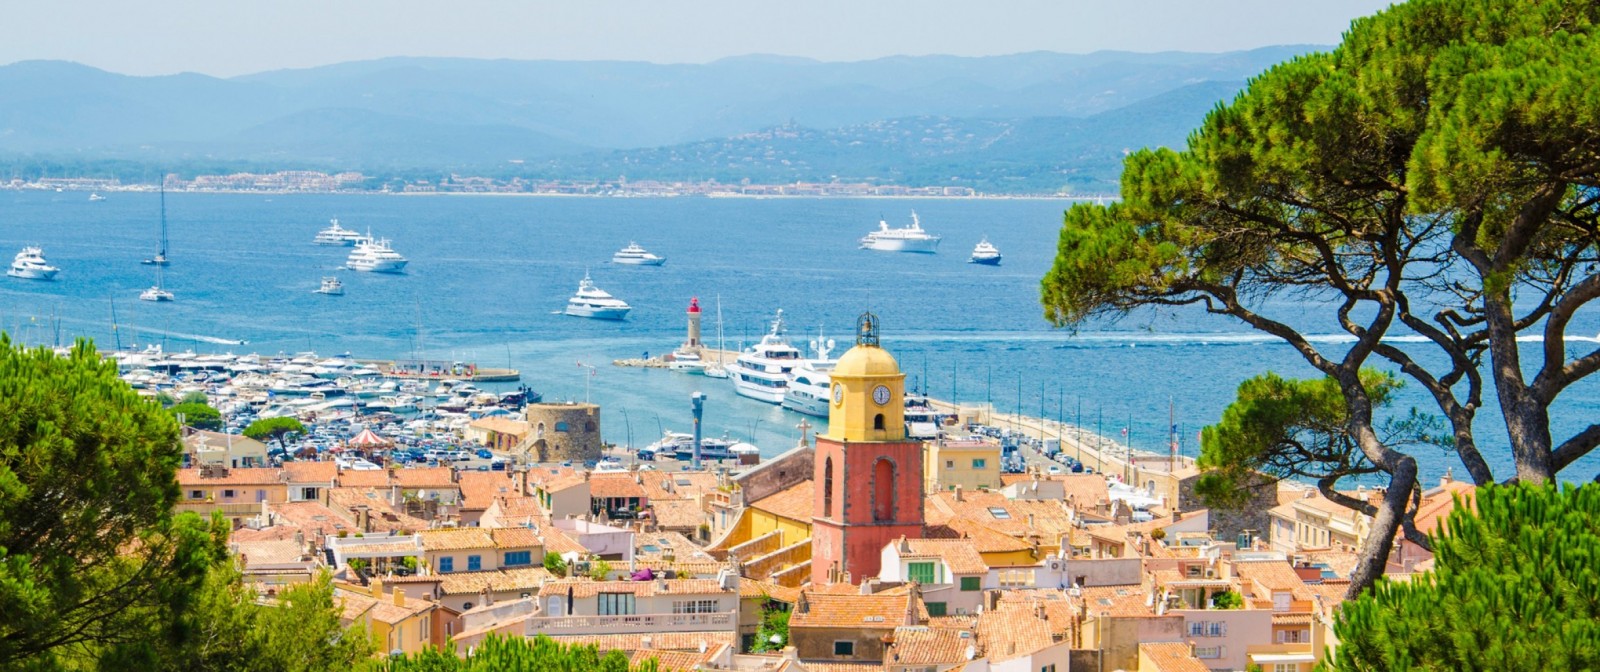 Private Chauffeur in Cannes - Premium Vehicles & Services - Reactivity 24/7 - Ruby Services - Car Rental with Driver in Cannes